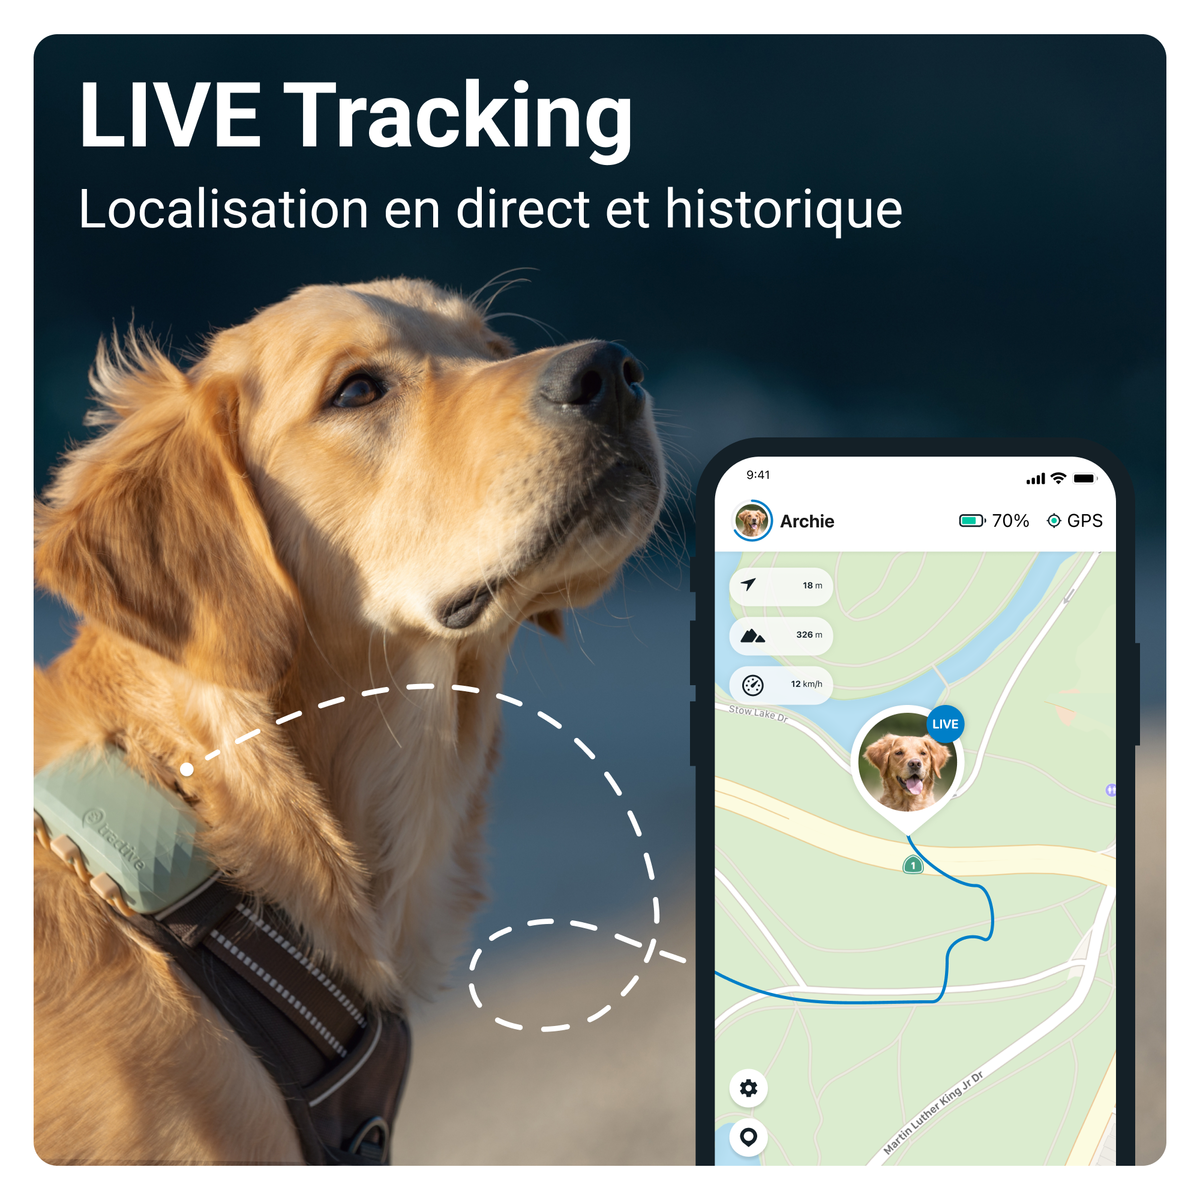 LIVE TRACKING